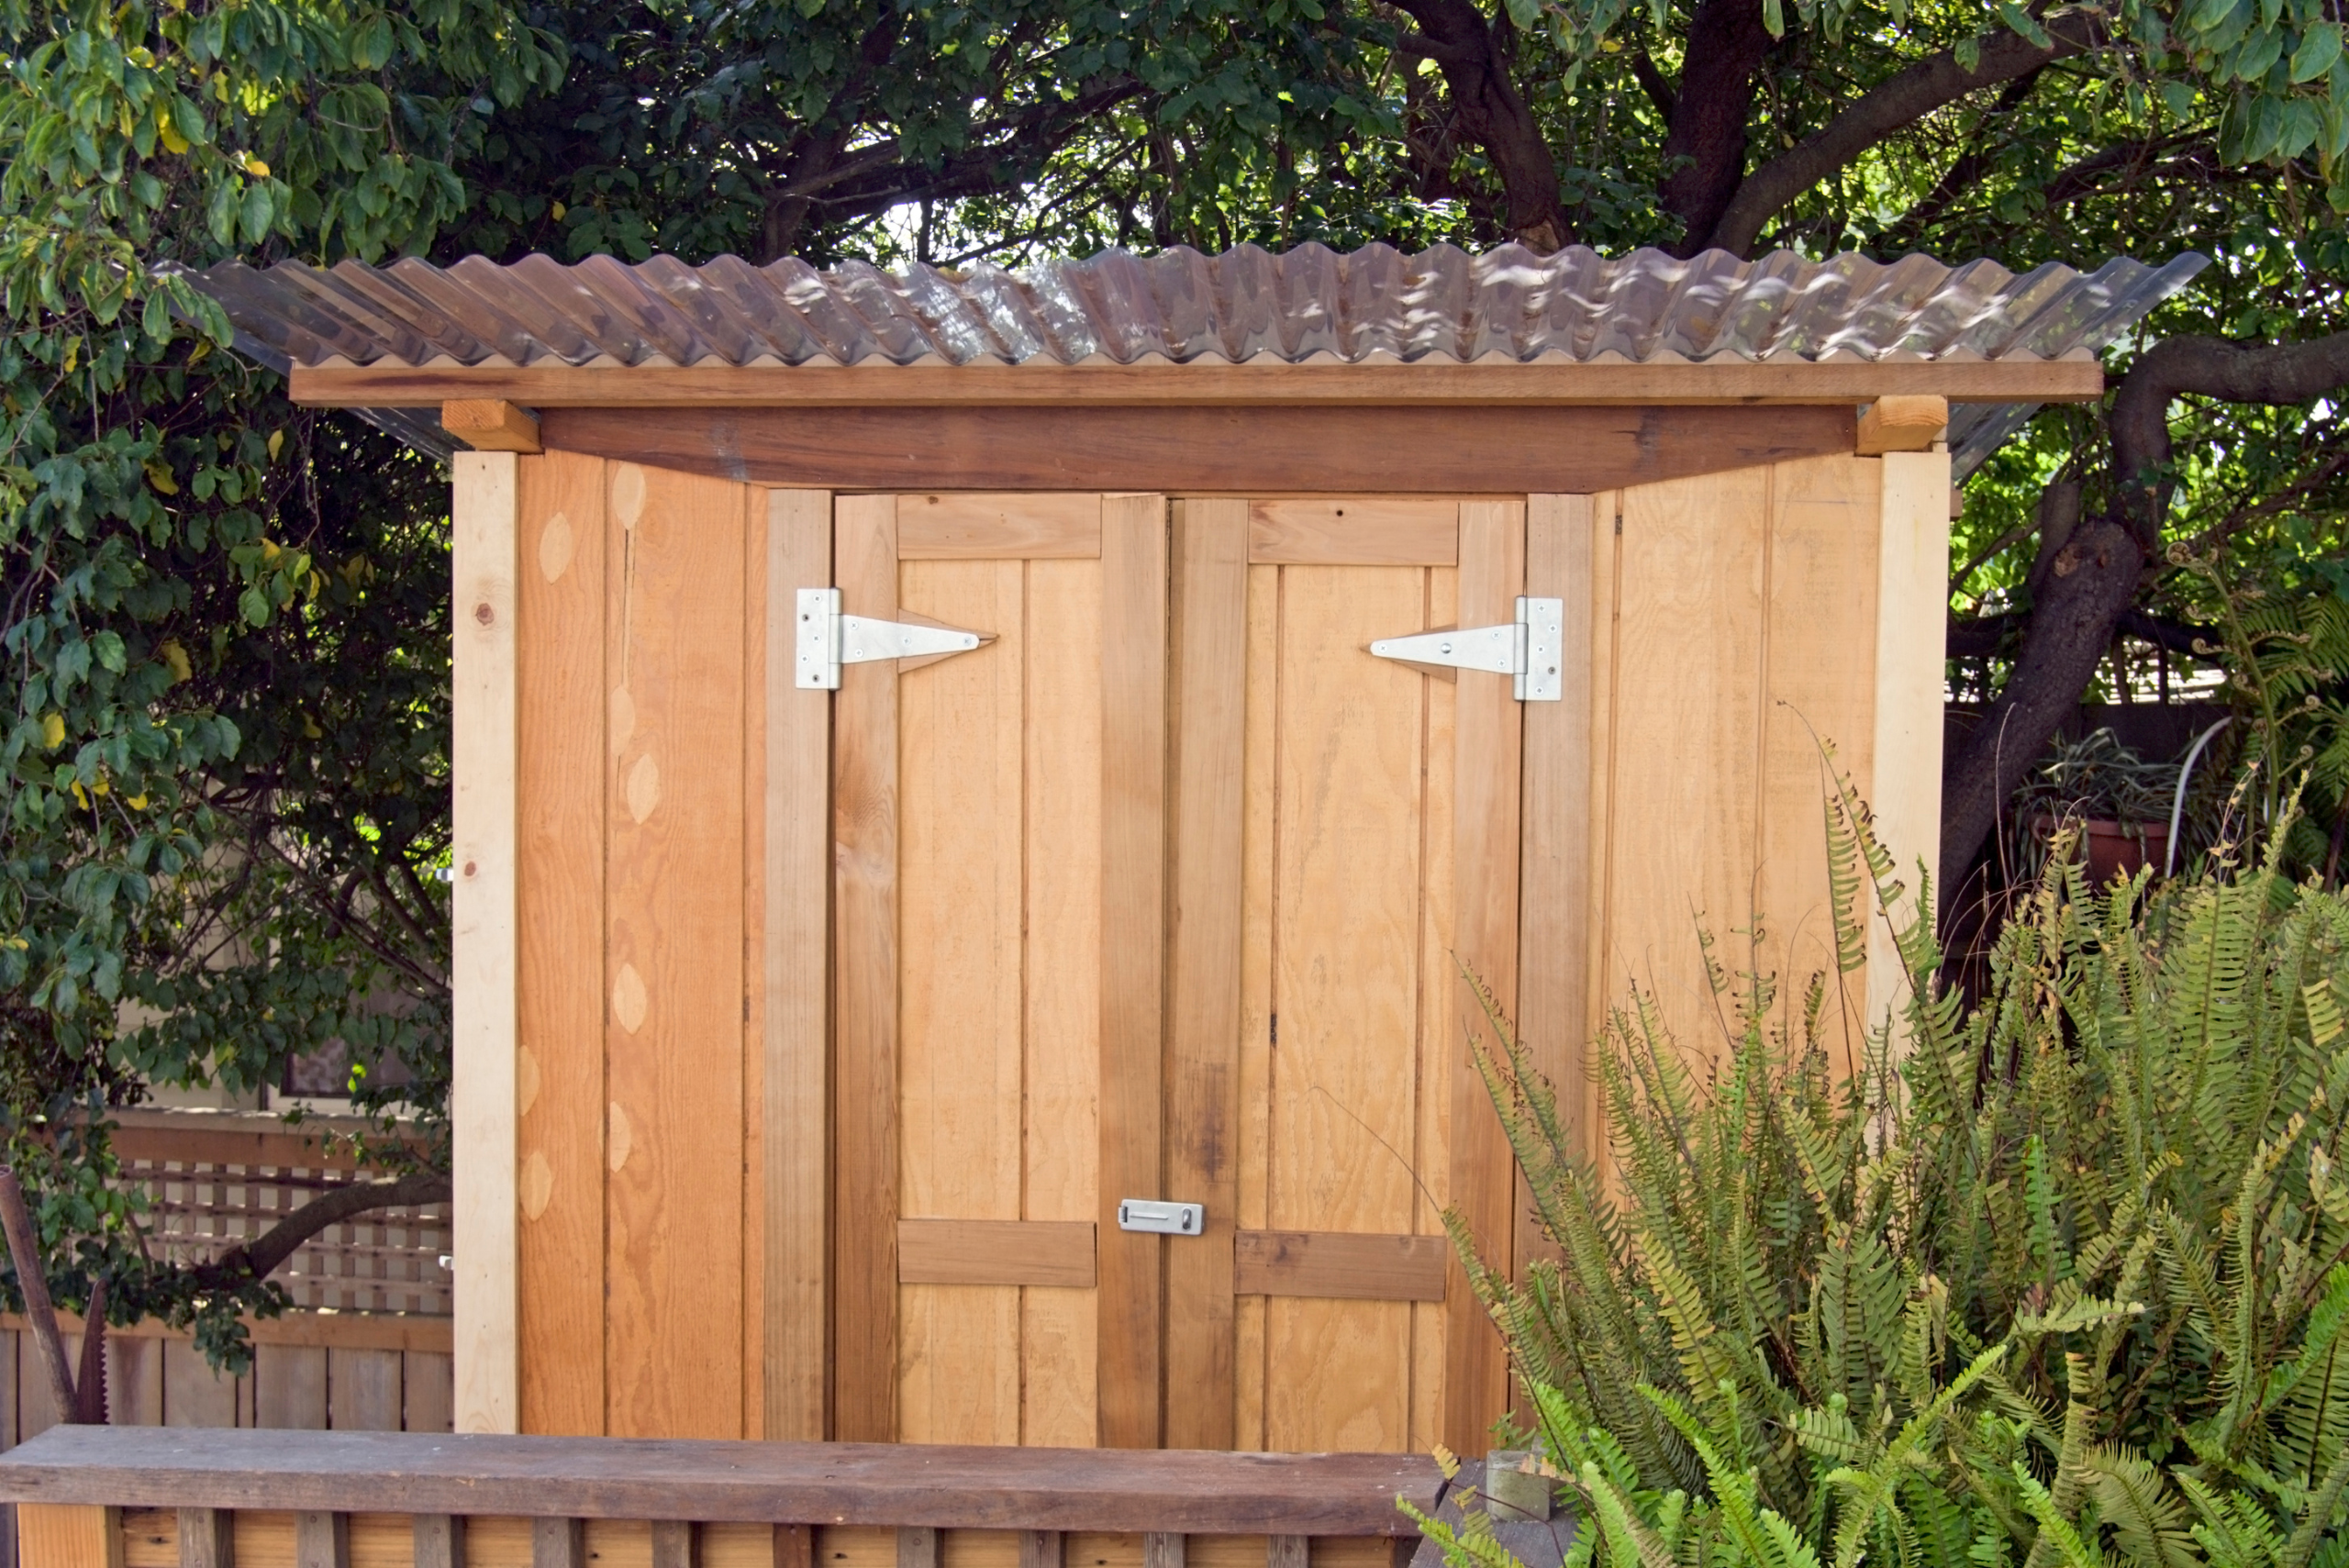 An outdoor wooden shed with double swinging doors.